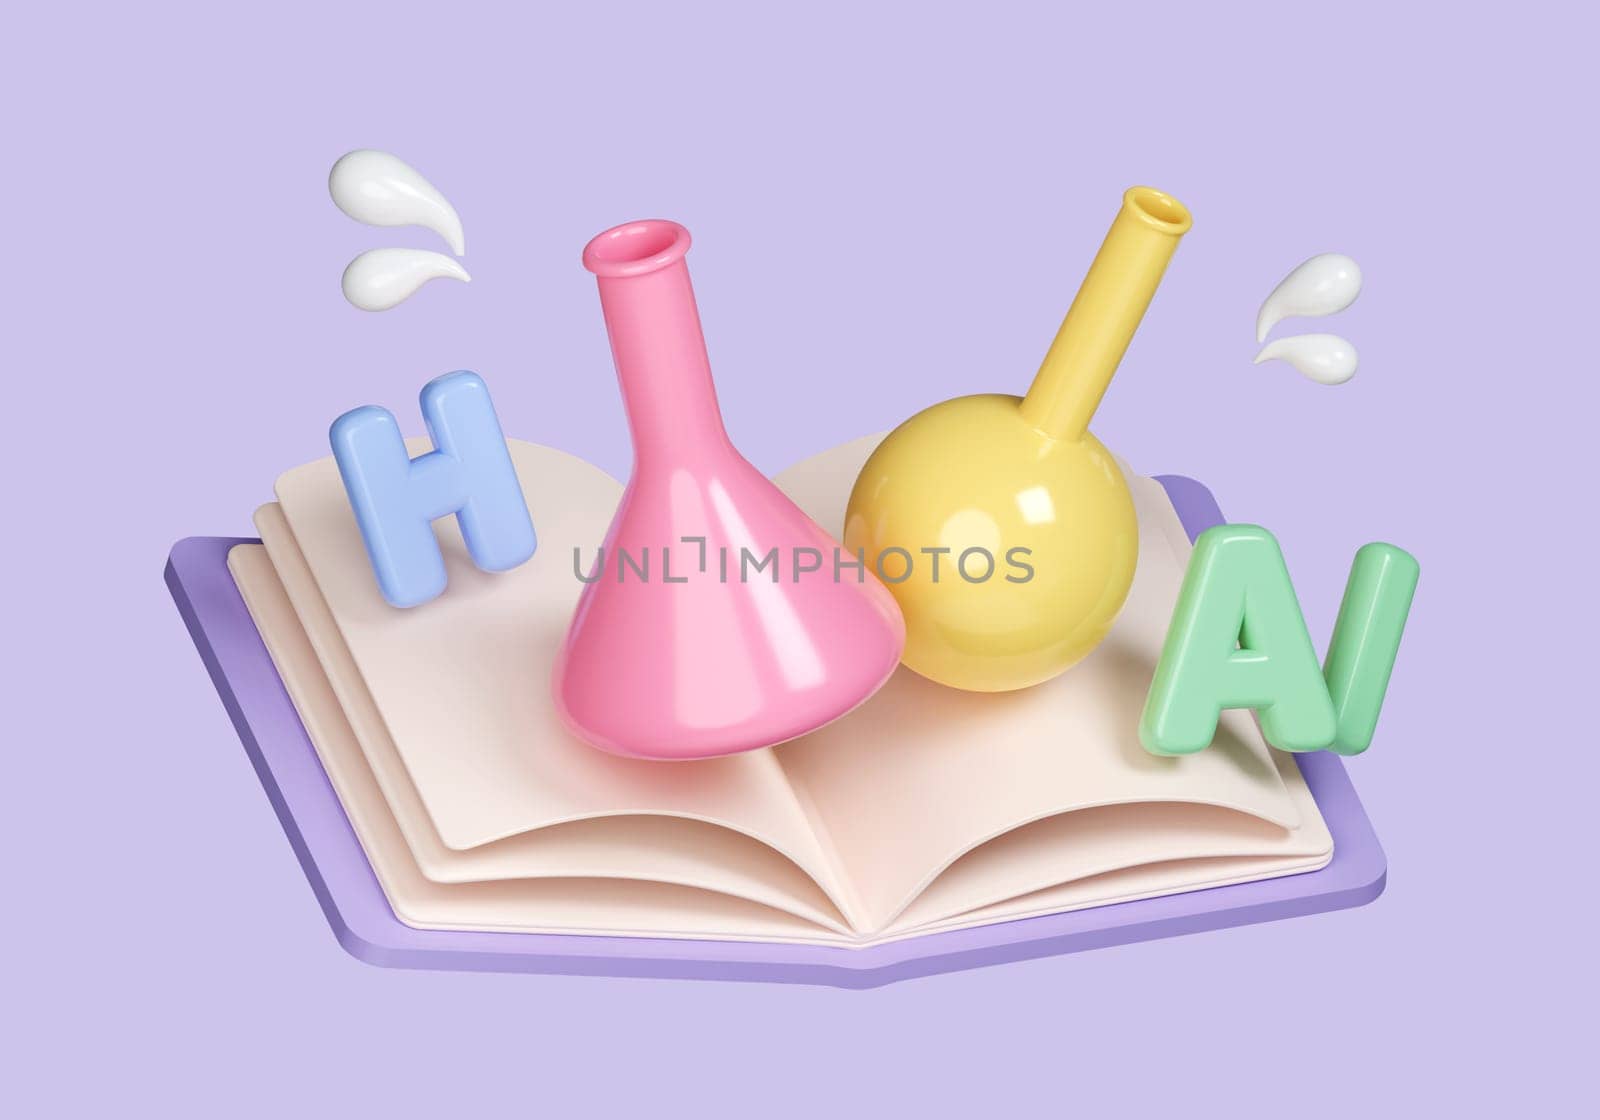 3D textbook icon with science learning. cartoon style isolated on pastel background. icon symbol clipping path. education. 3d render illustration by meepiangraphic